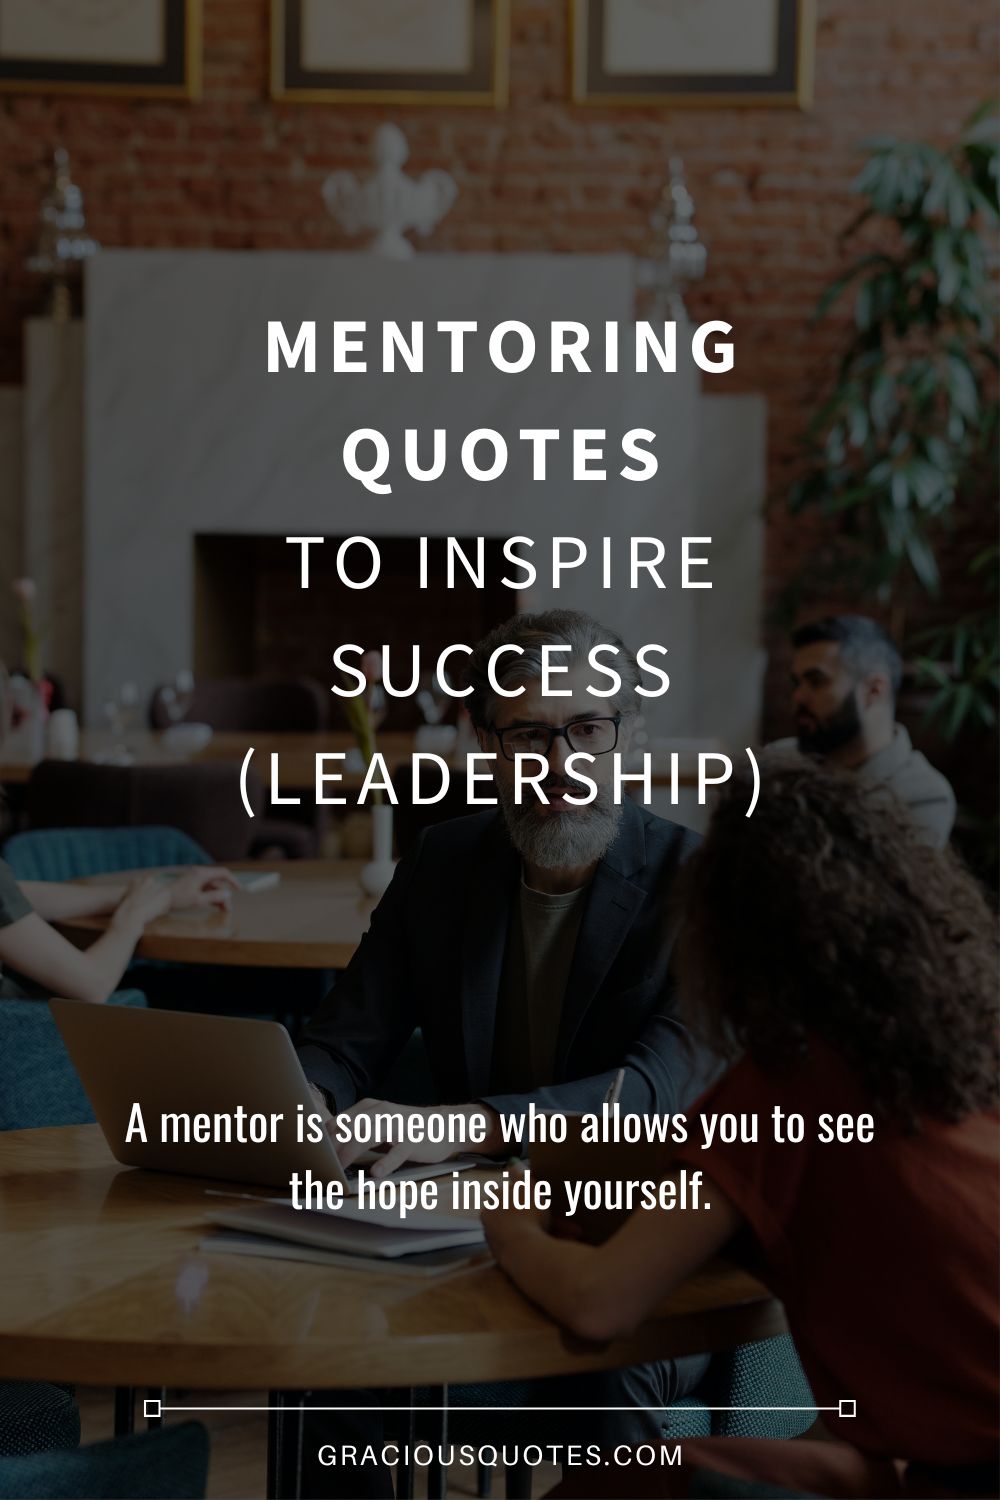 Mentoring Quotes to Inspire Success (LEADERSHIP) - Gracious Quotes